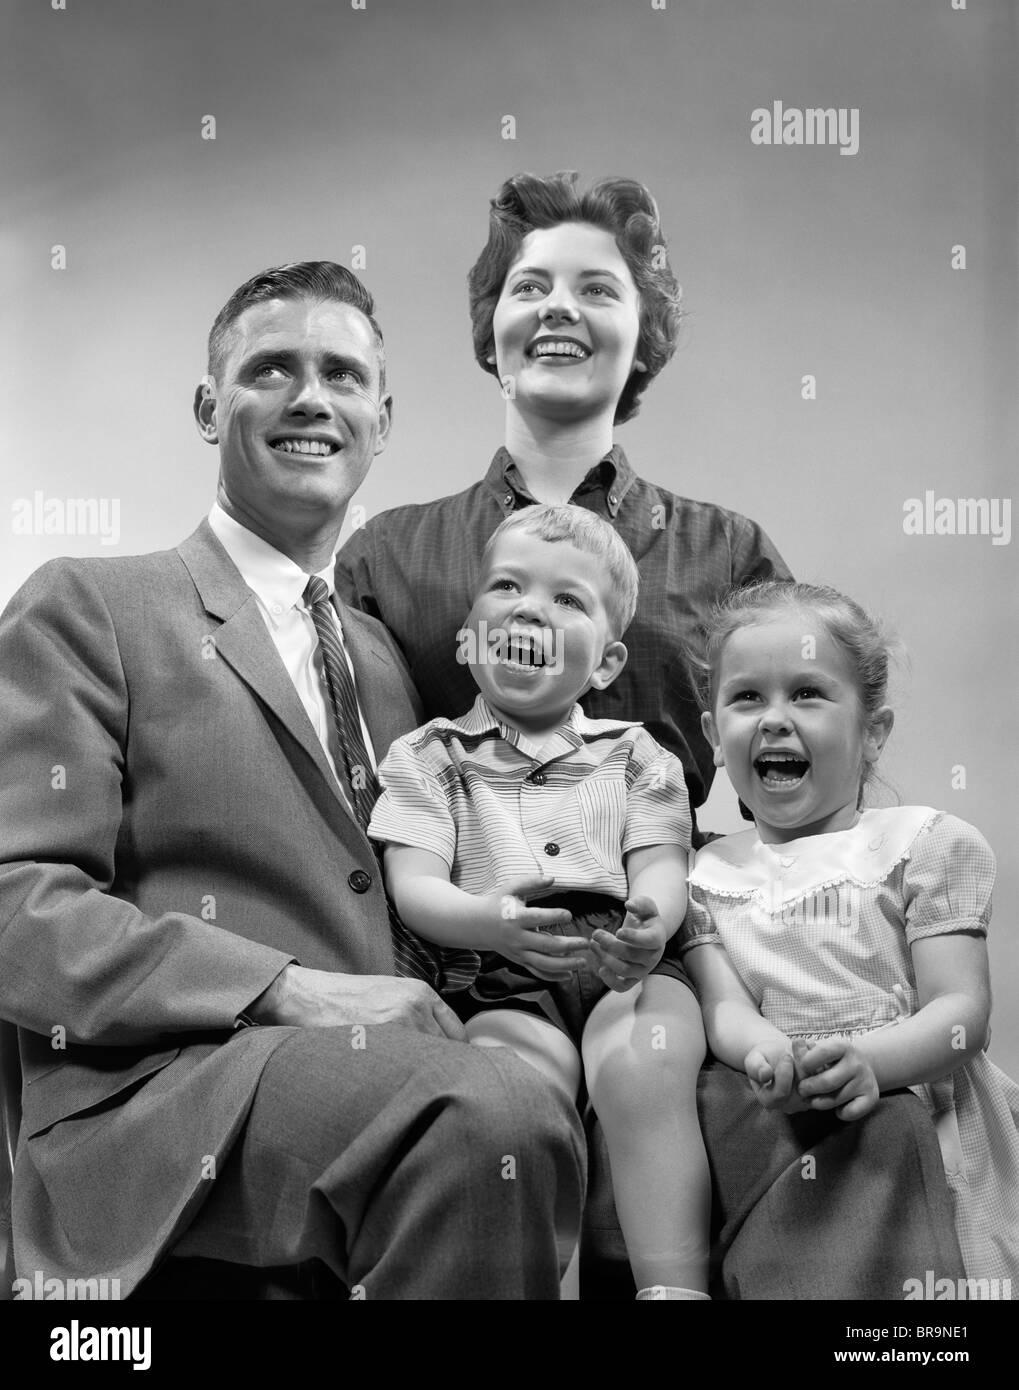 1950s FAMILY SMILING POSING TOGETHER Stock Photo